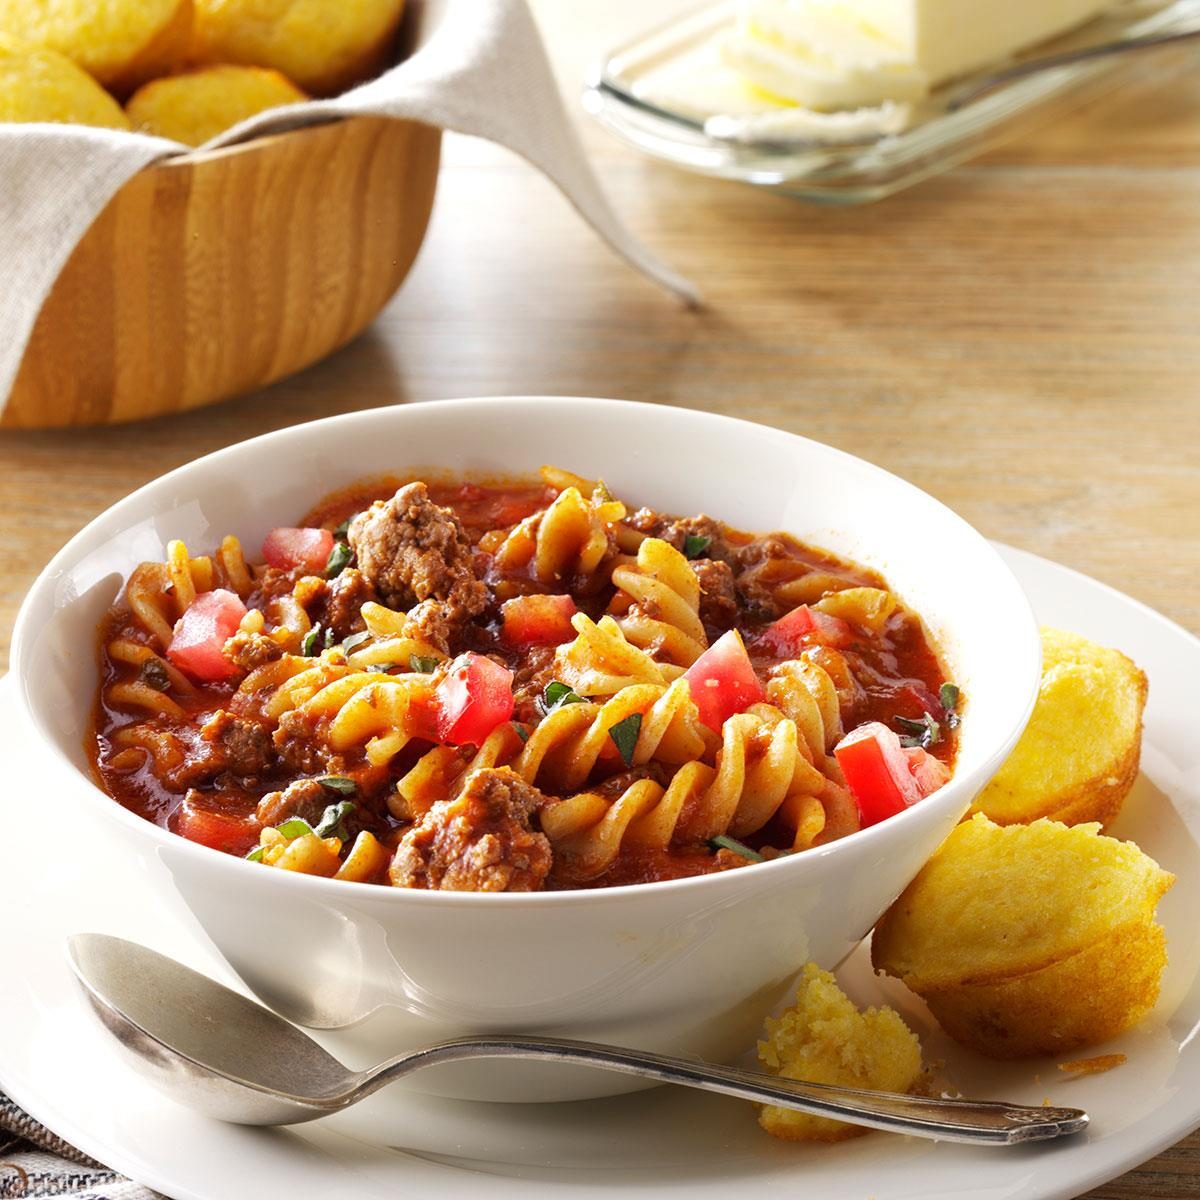 Chili Beef Pasta Recipe: How to Make It | Taste of Home